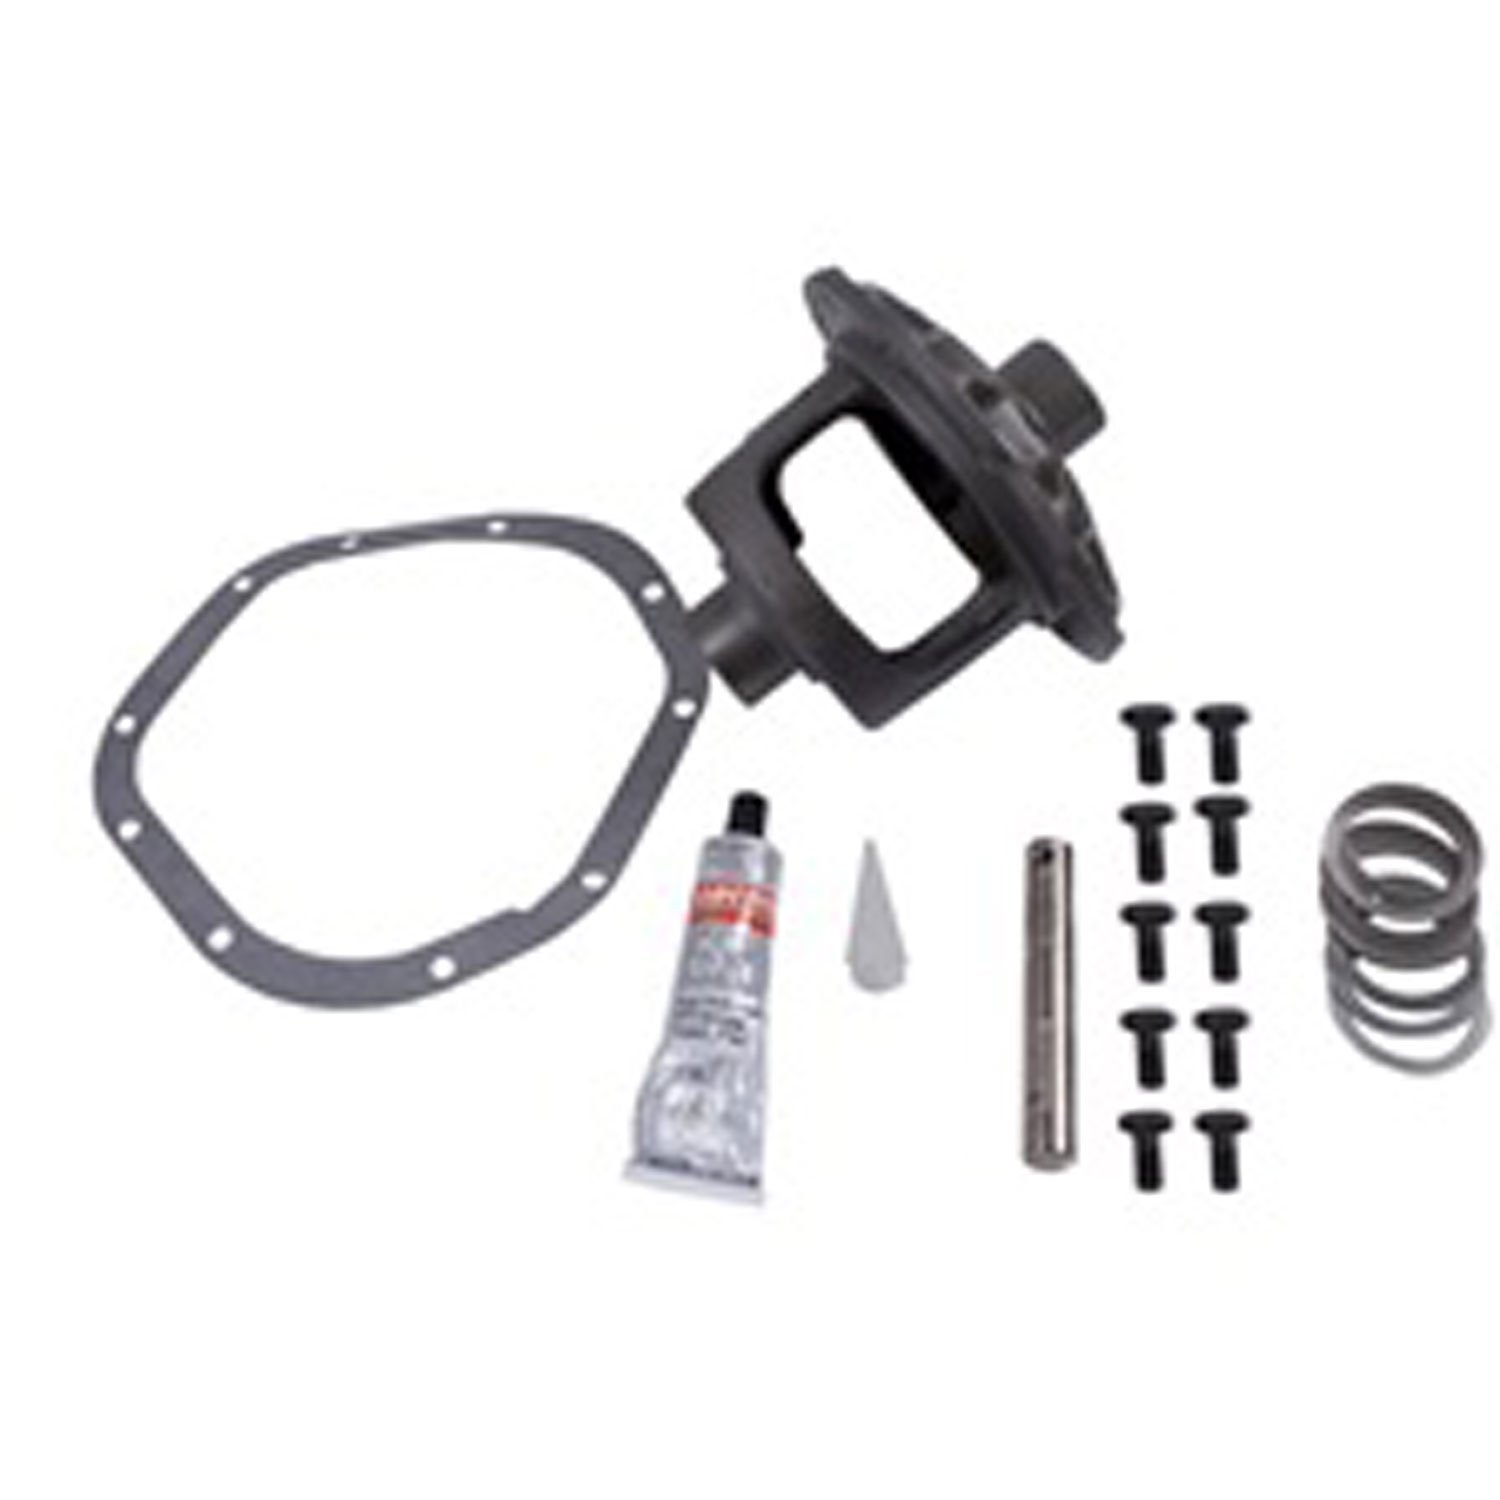 This differential carrier kit from Omix-ADA fits 70-06 Jeep vehicles with Dana 44 rear. Accepts 3.92 to 5.38 ratios.